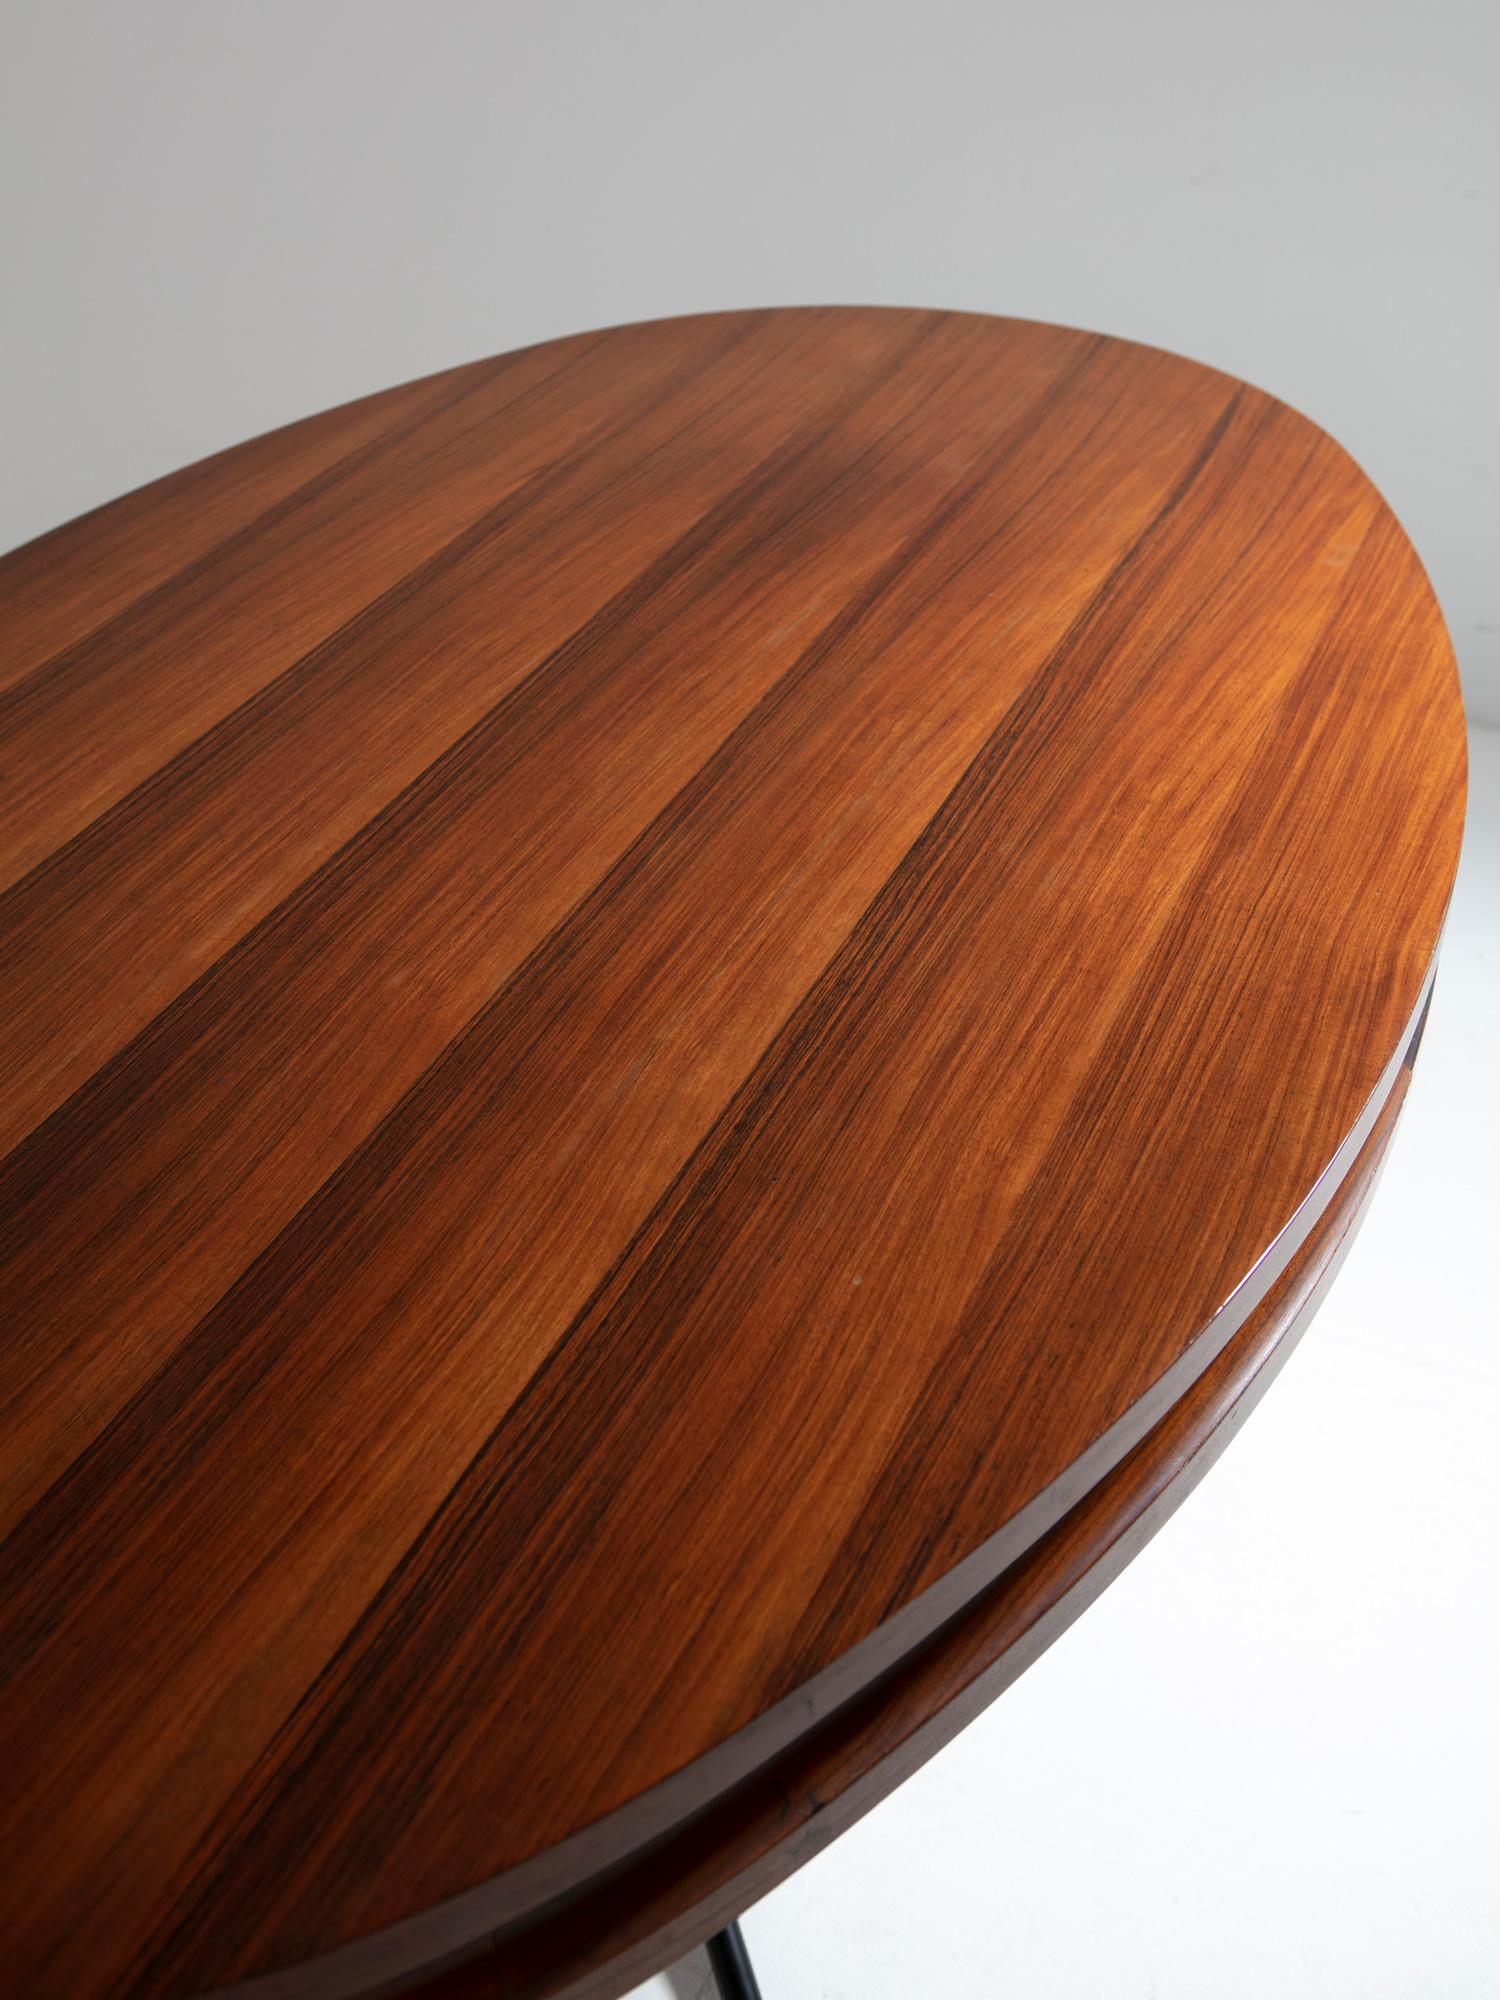 Italian One-off Oval Wood and Metal Table by Adelmo Rascaroli, Italy, 1960s For Sale